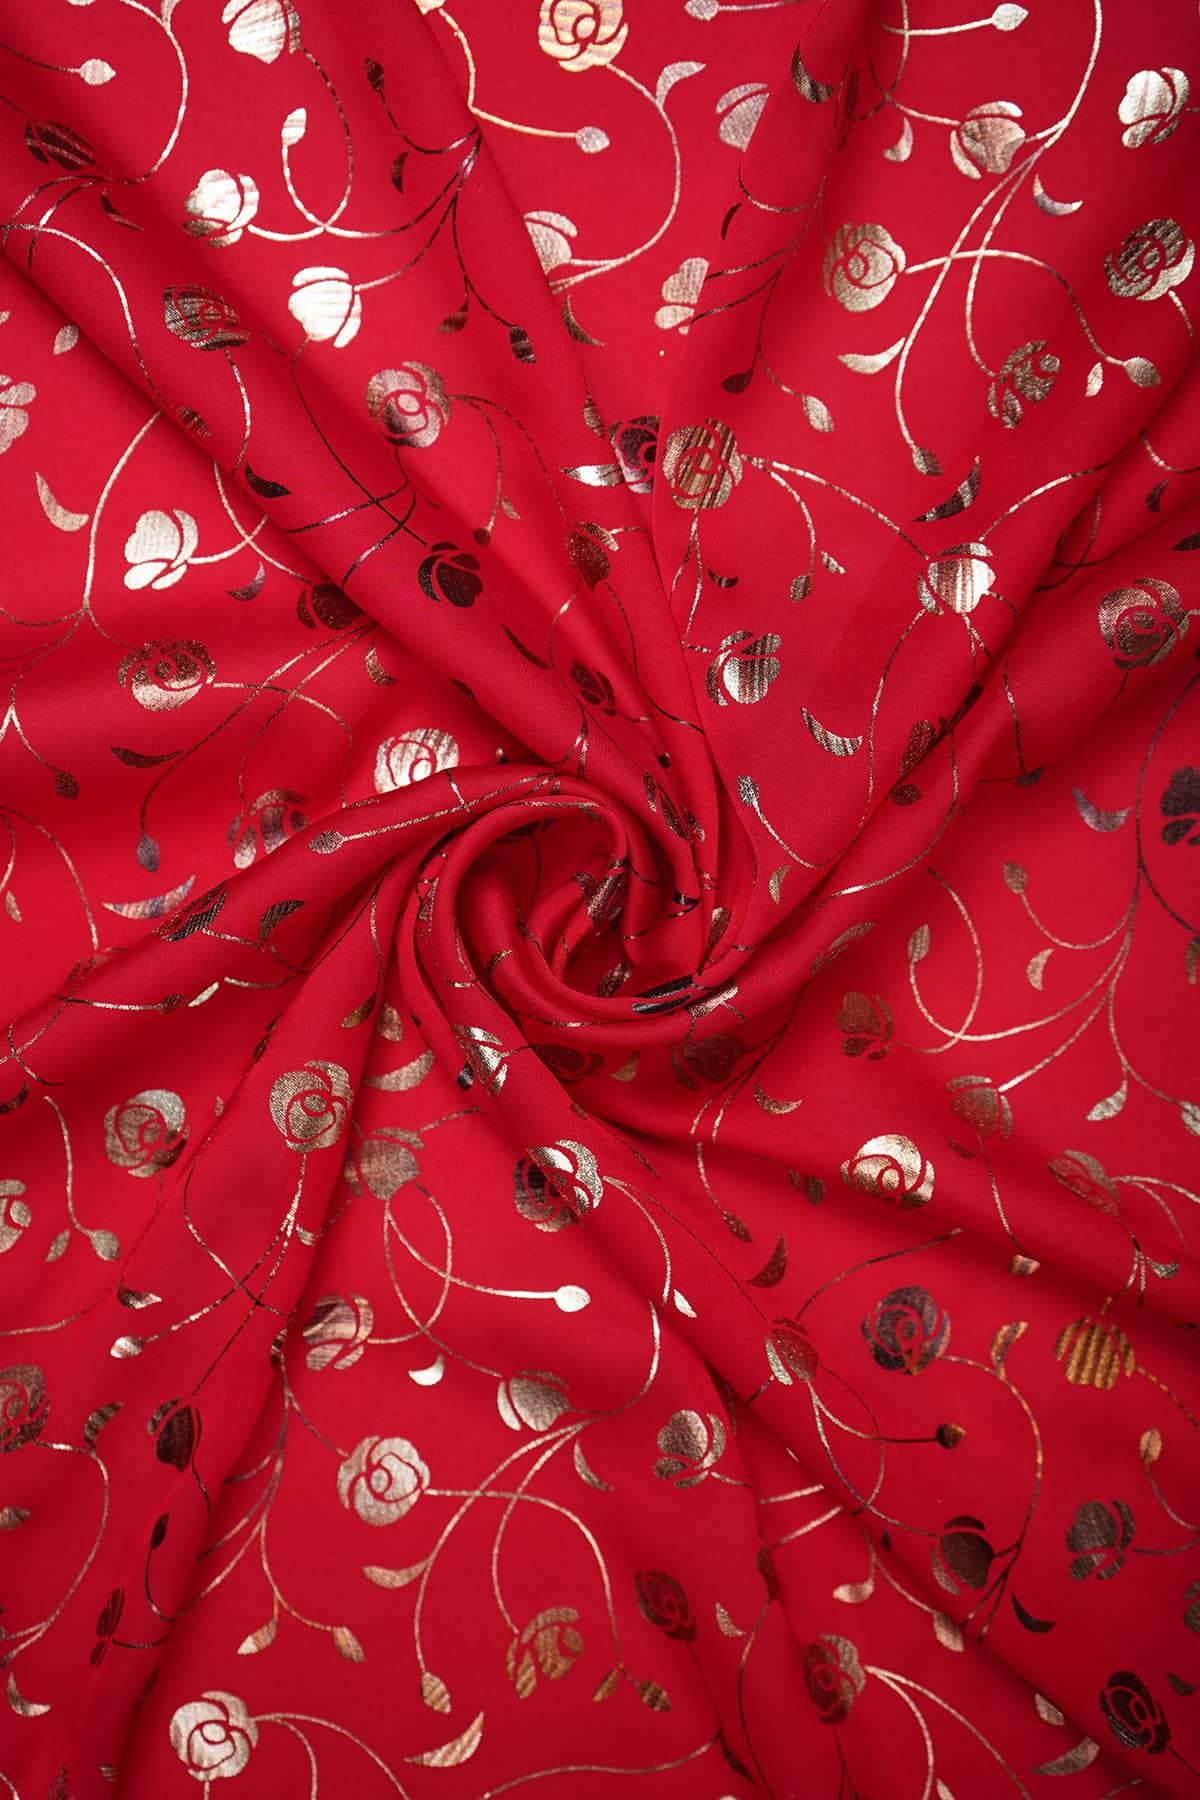 Rose-Plant Vine Foil Printed on Red Charmie Satin - saraaha.com - accesories, Charmie Satin, dresses and more, gowns, indo western, kurtas, sarees, Satin, Screen Print Foil Work, skirts, Suits, tops, trimmings